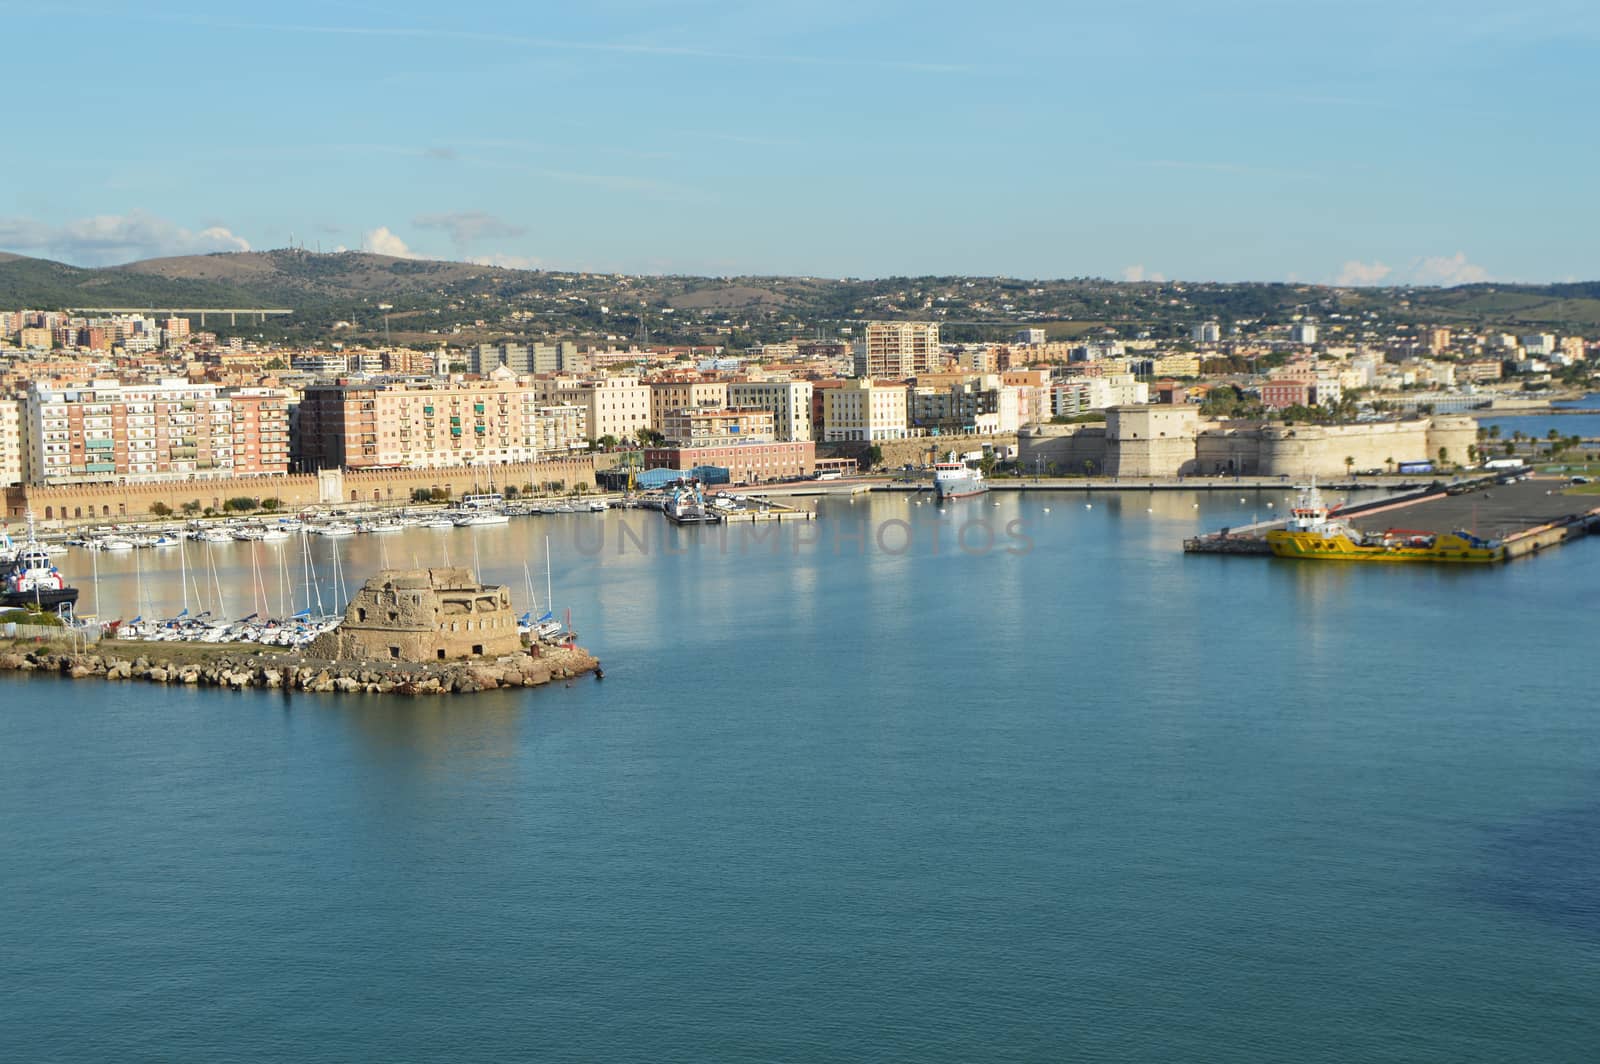 Panoramic view of Civitavecchia port, coast, port, buildings, October 7, 2018 by claire_lucia